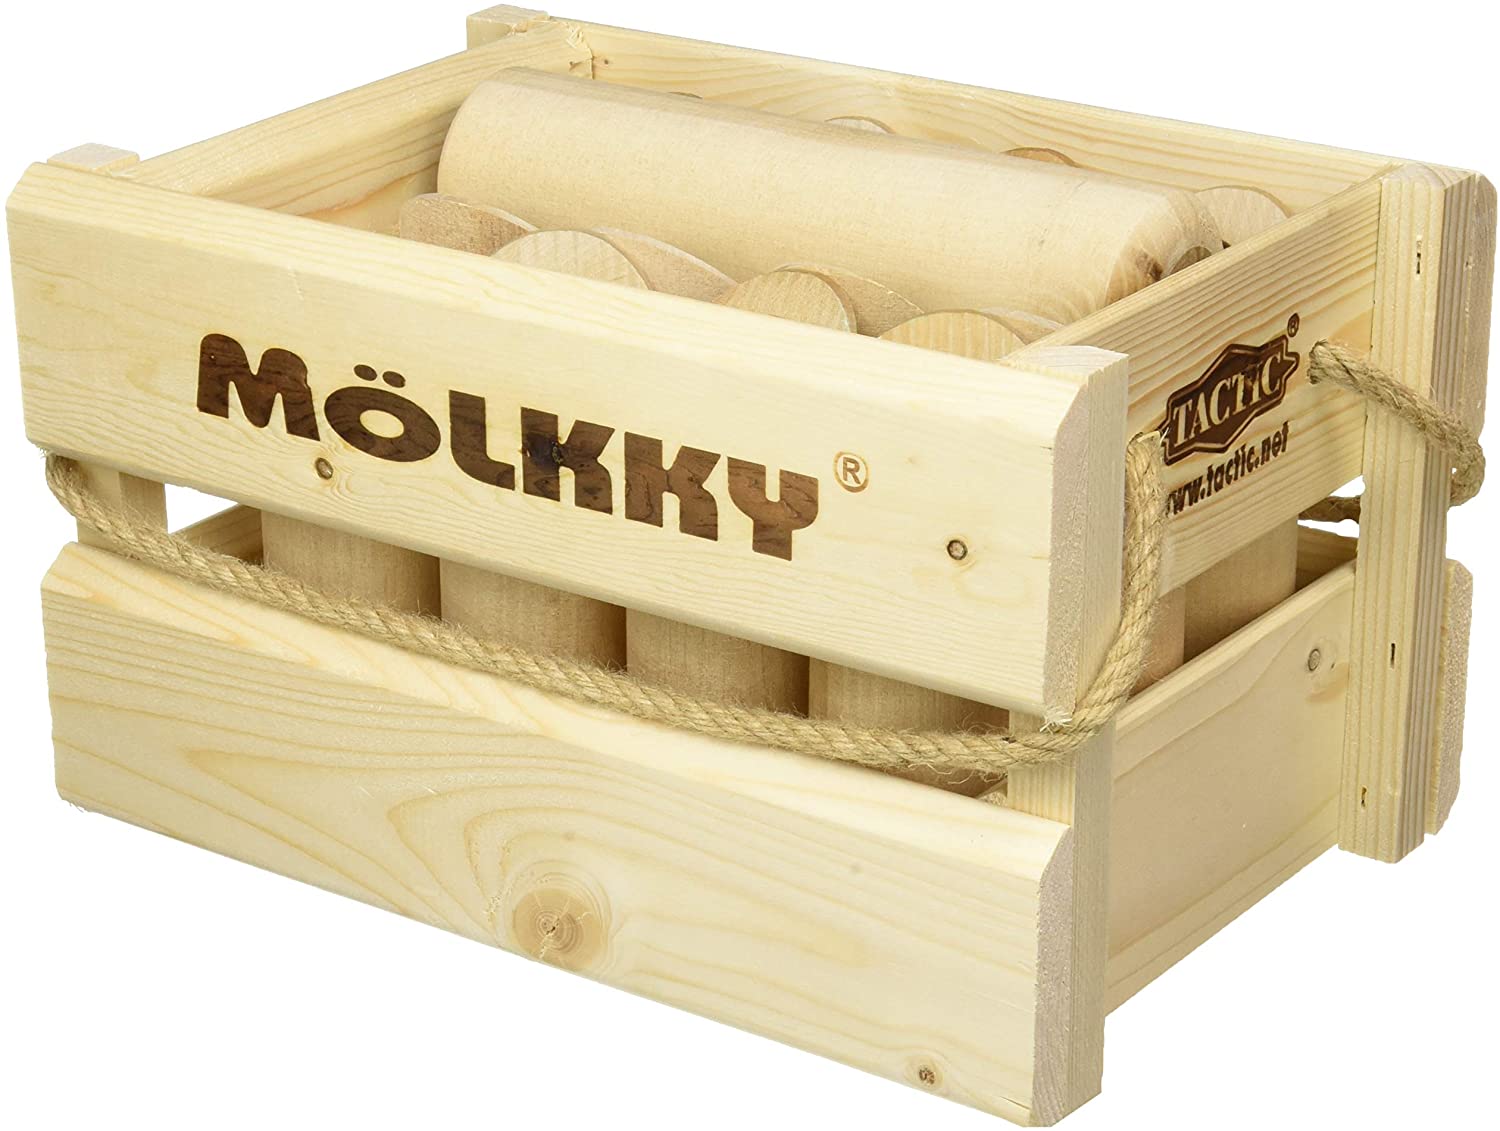 Tactic Molkky In A Crate Wooden Skittle Game In Stock